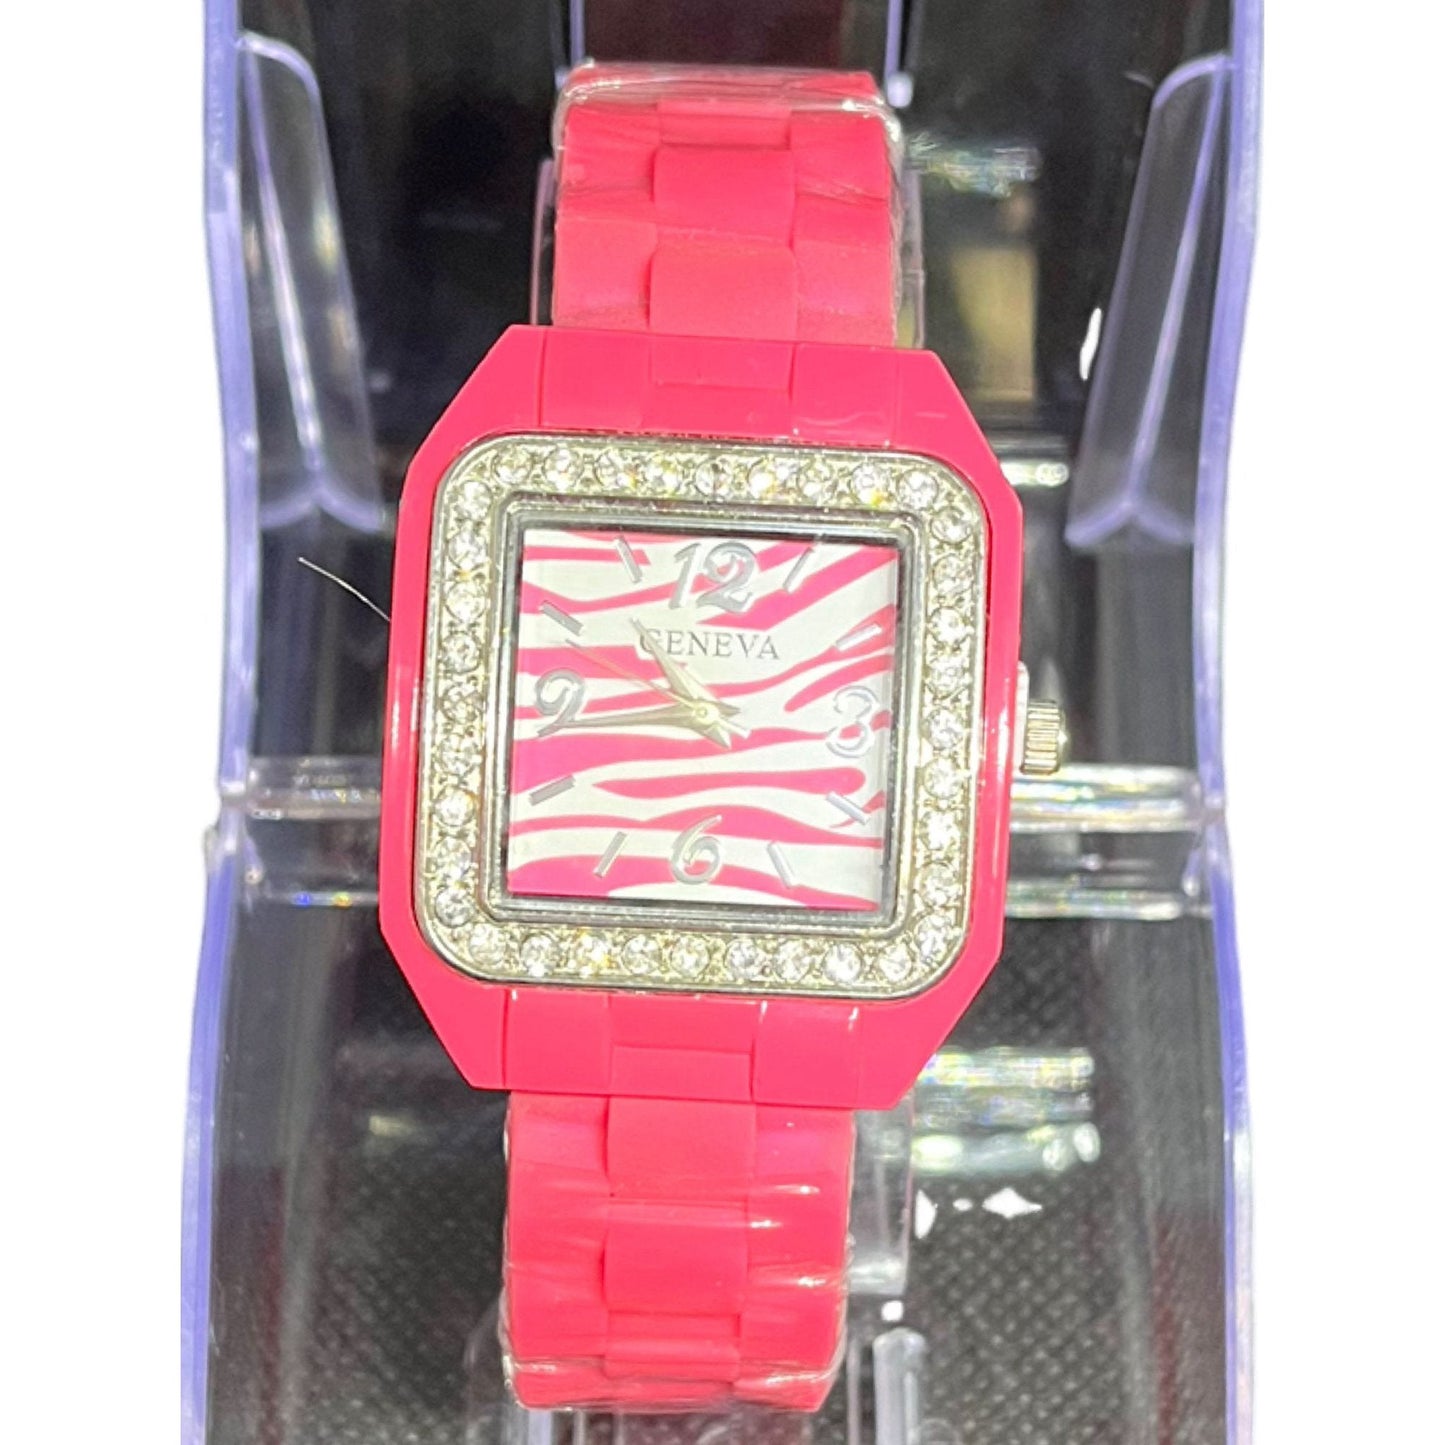 Fashion Watch for Women, Zebra, Silicone Band |Available in 11 different colors